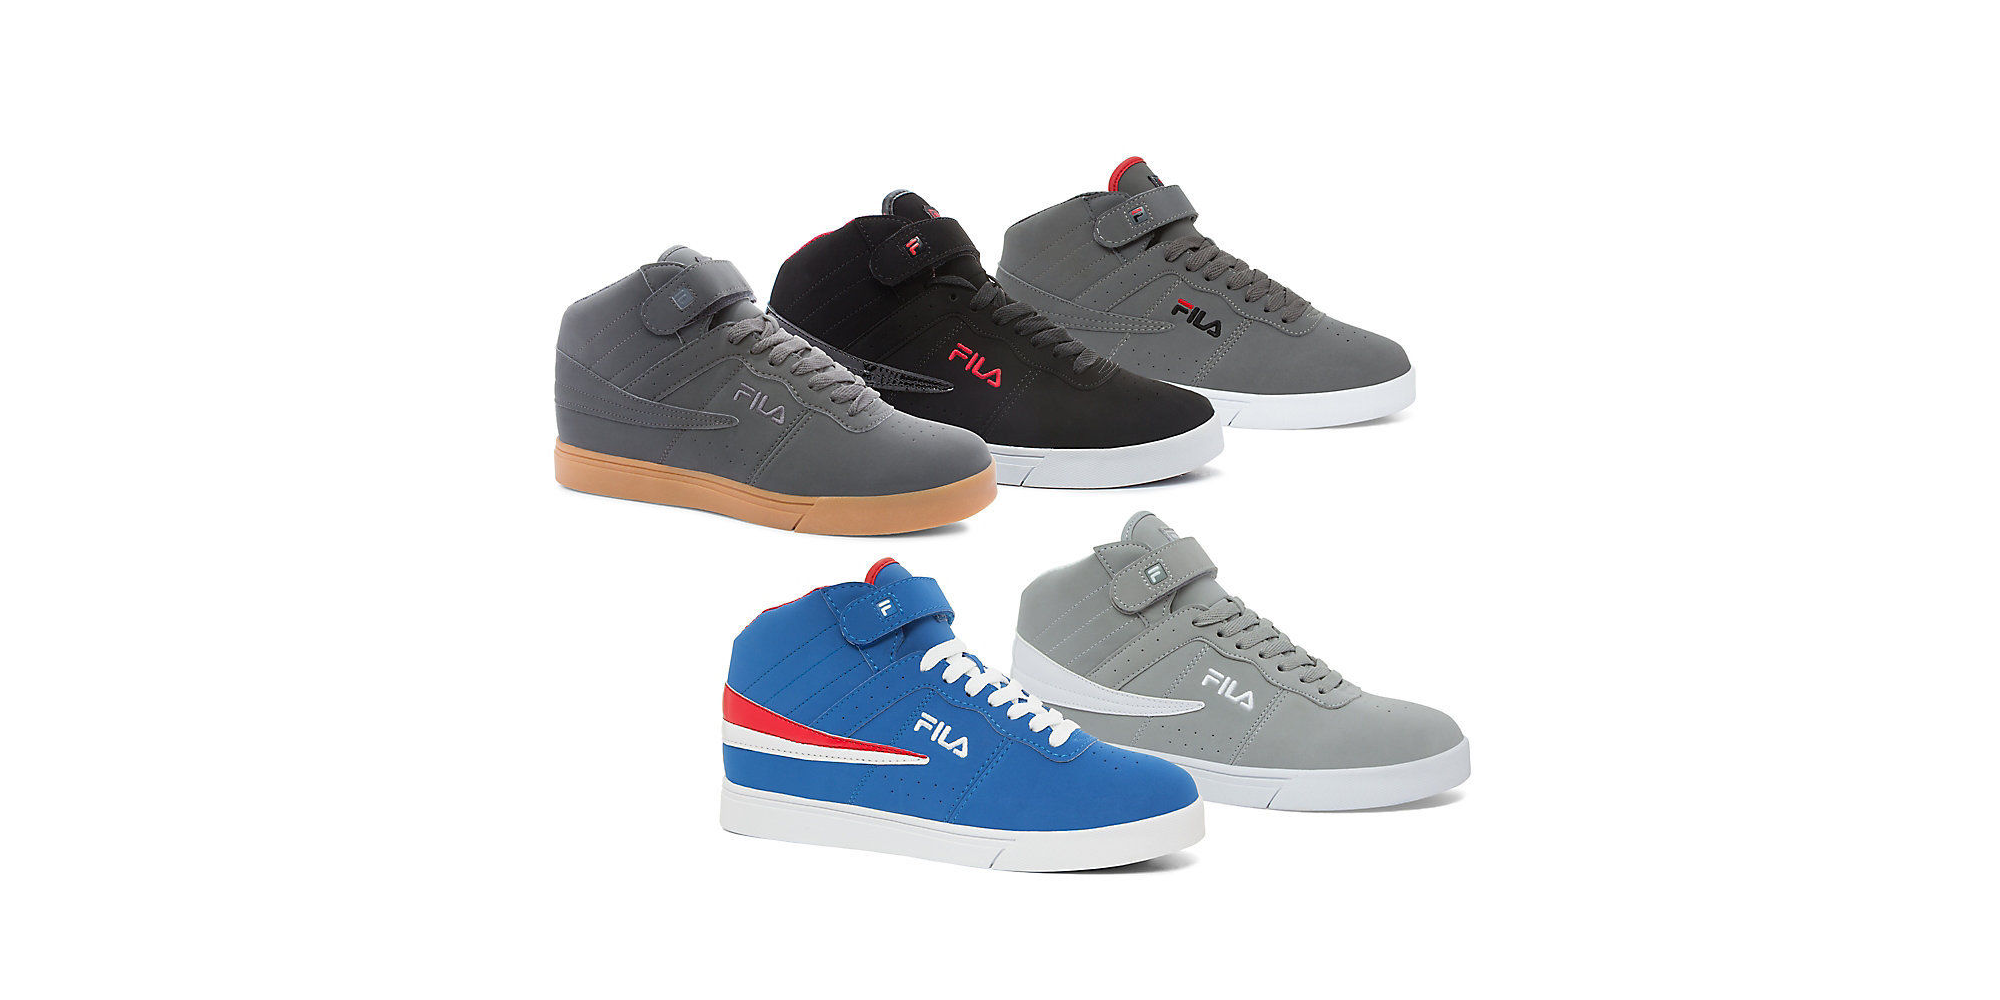 Fila Men’s Vulc 13 Casual Shoes Only $19.99! Up to 71% OFF + FREE Shipping!